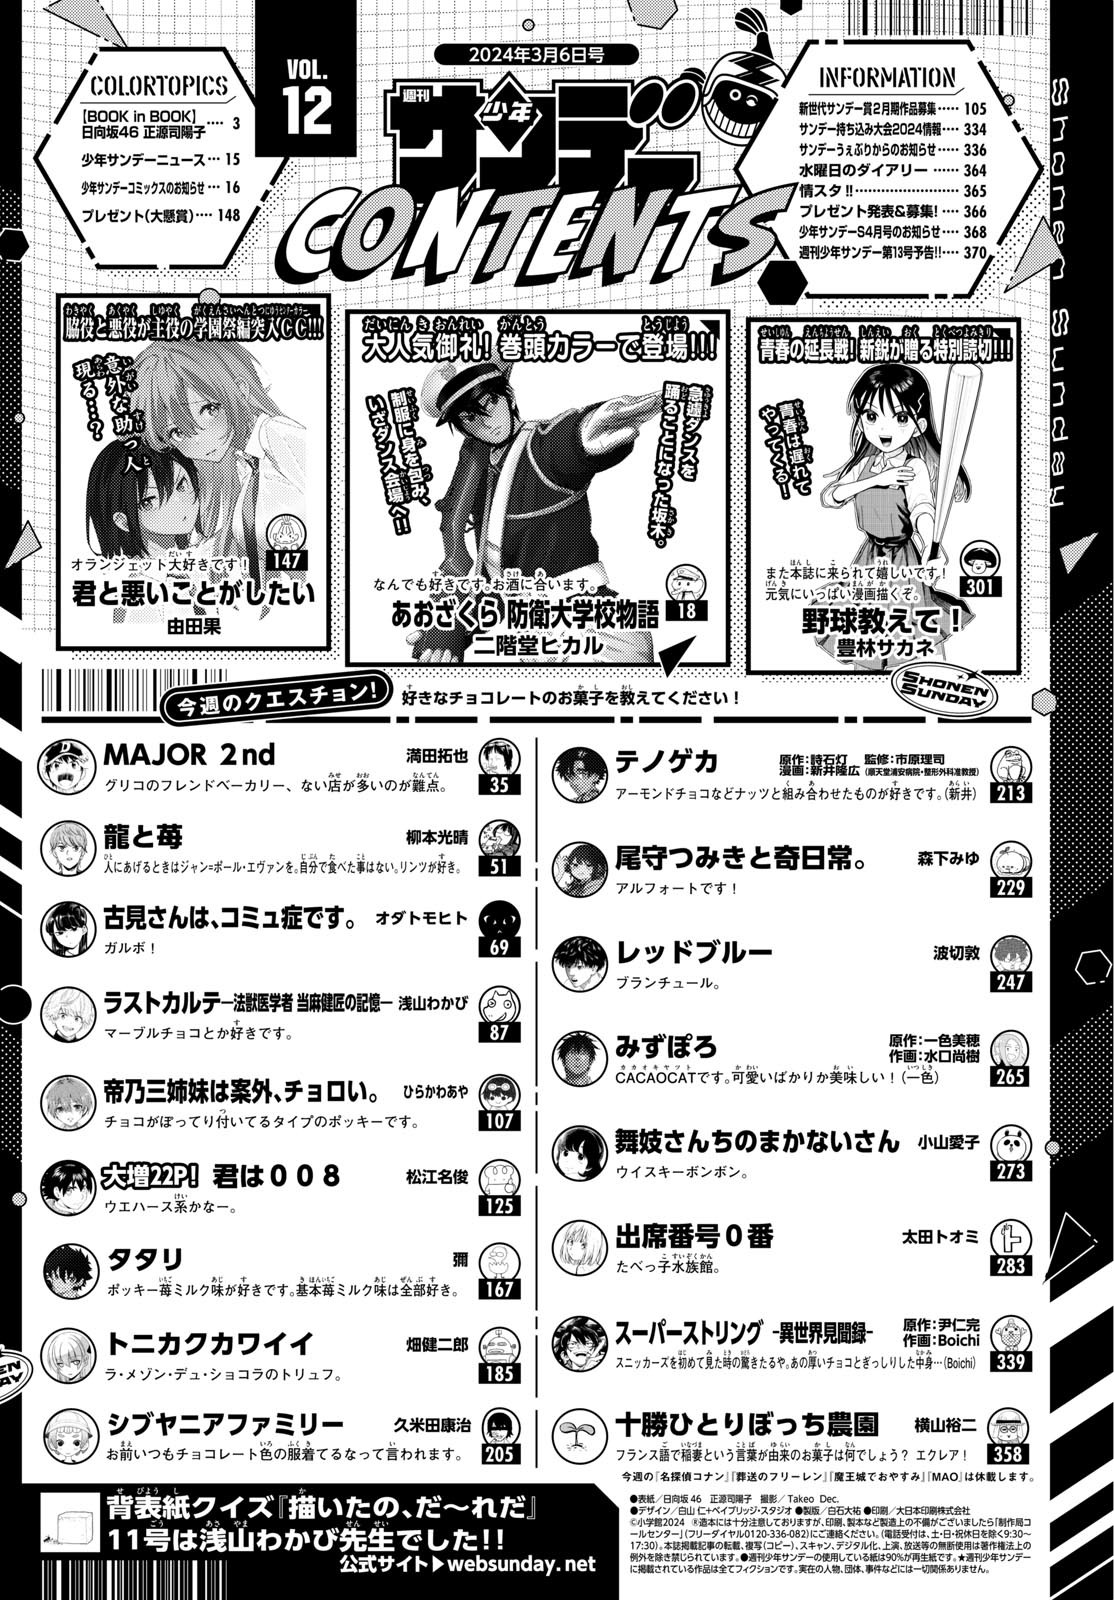 Weekly Shōnen Sunday - 週刊少年サンデー - Chapter 2024-12 - Page 2